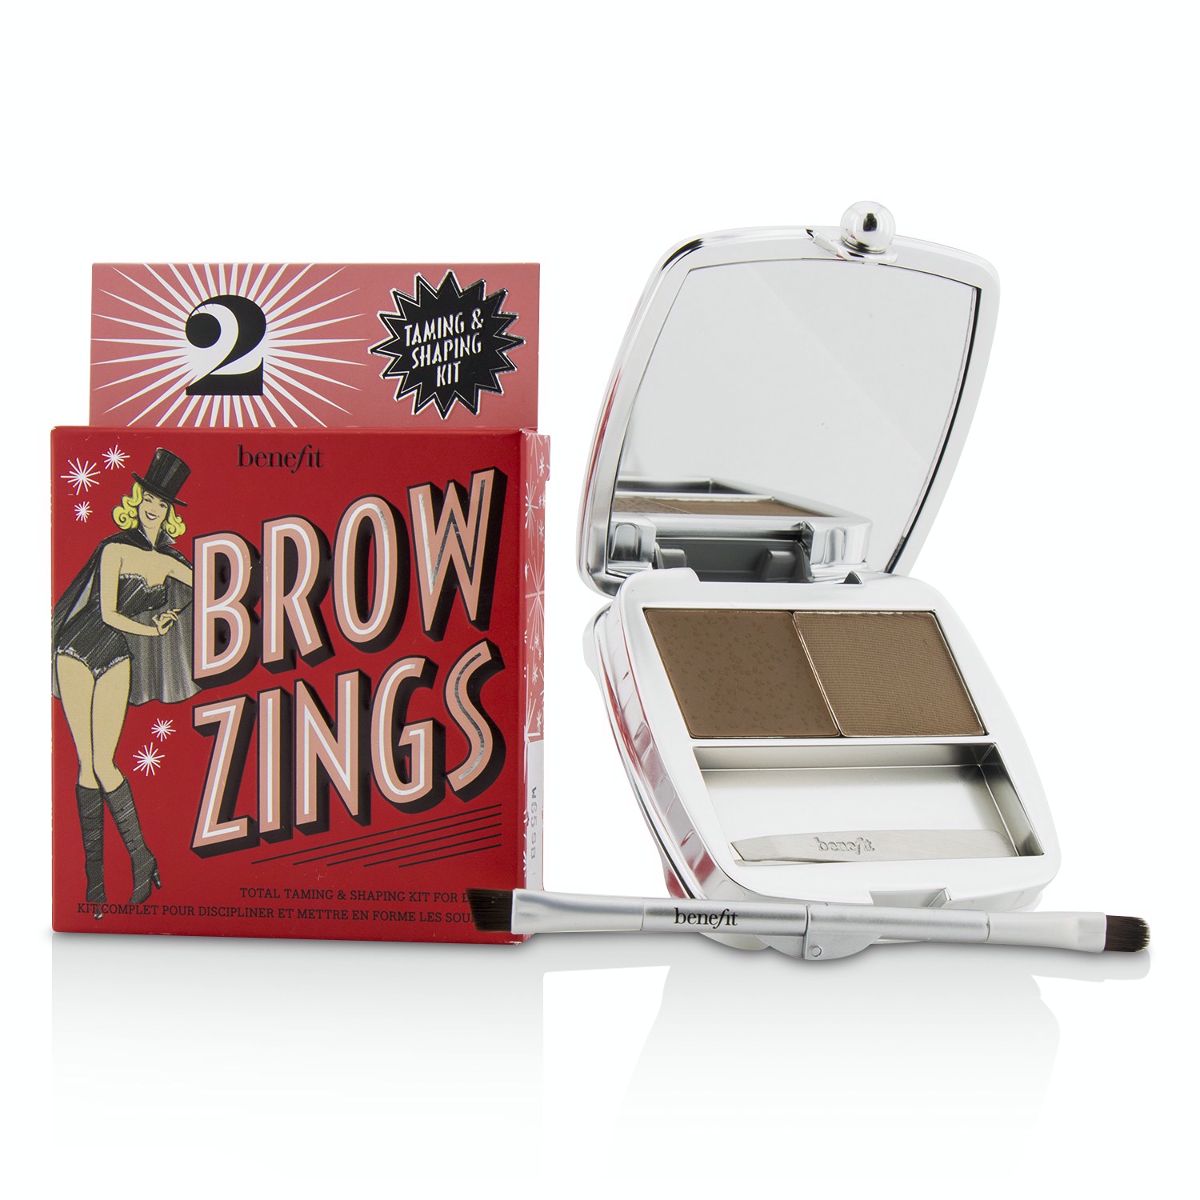 Brow Zings (Total Taming  Shaping Kit For Brows) - #2 (Light) Benefit Image